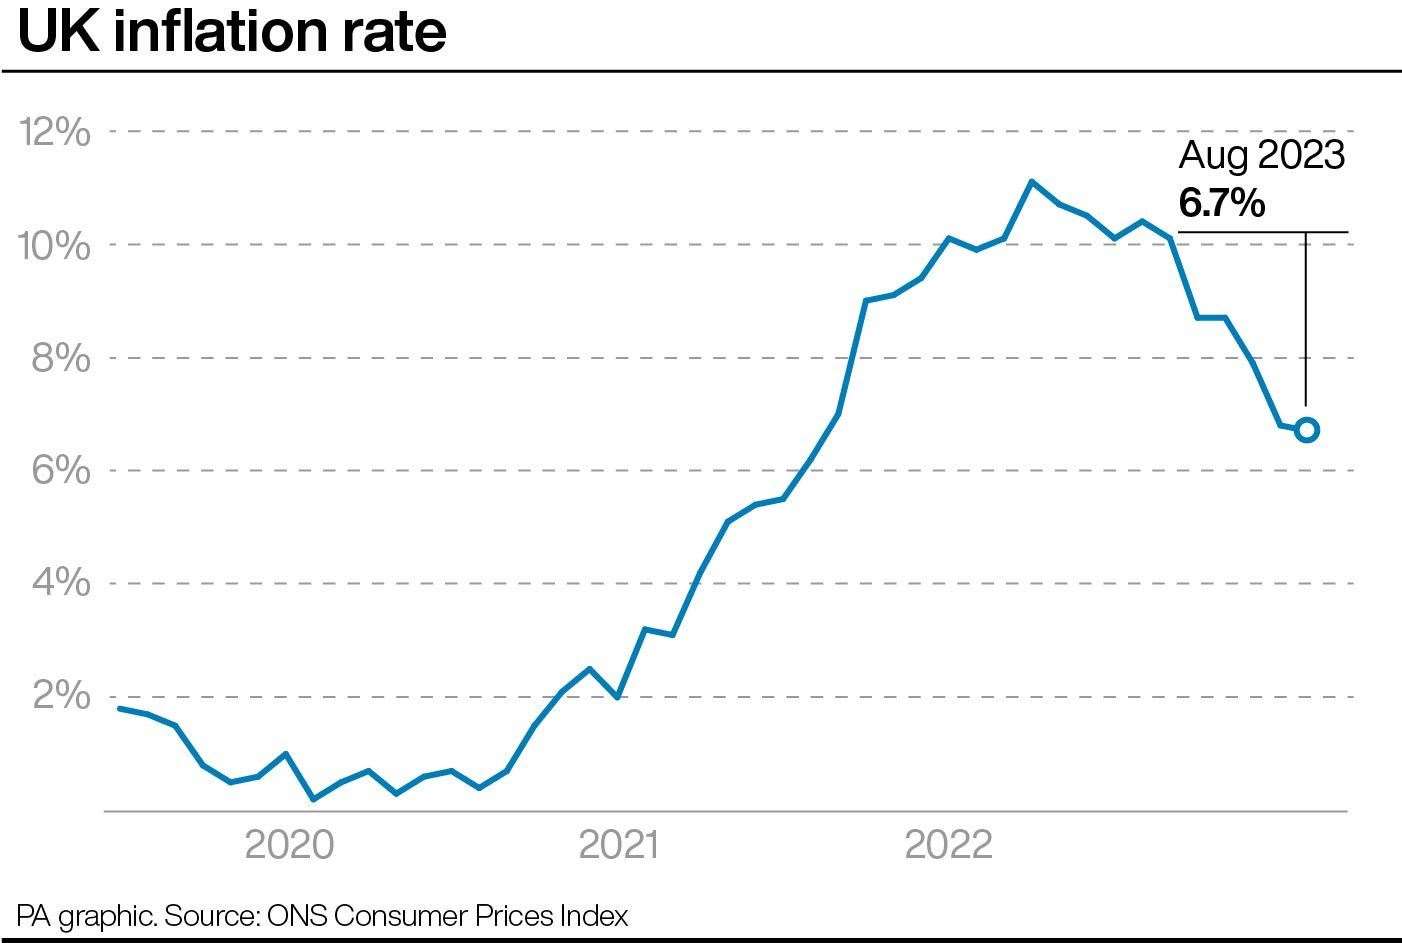 Inflation continues to ease, as does concern about price rises (PA Graphics)